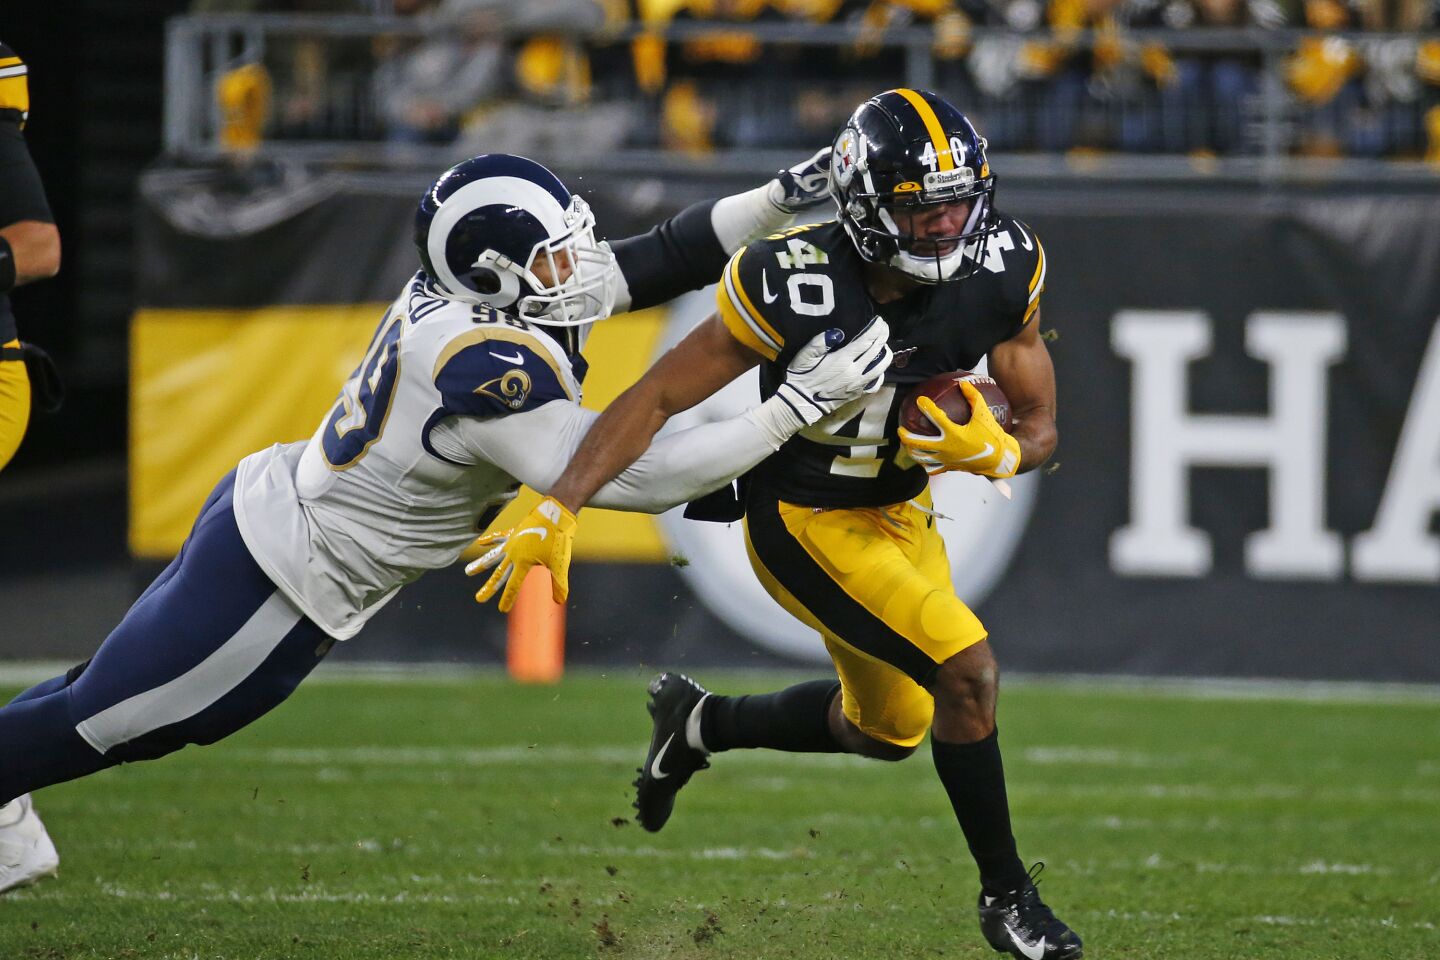 Steelers running back Tony Brooks-James carries the ball